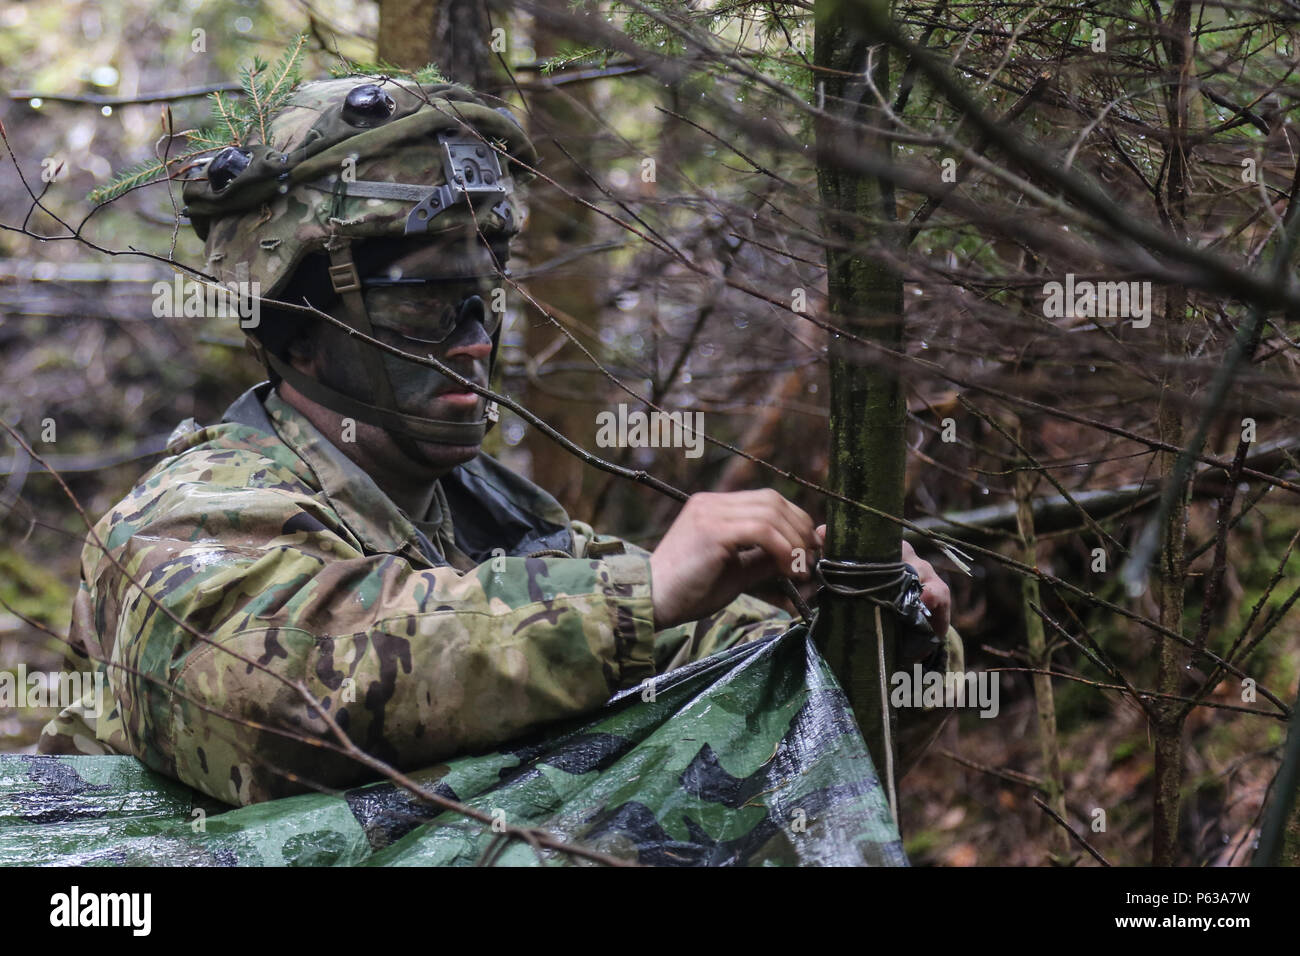 A U.S. Soldier of 2nd Battalion, 503rd Infantry Regiment, 173rd Airborne Brigade secures a weather resistant tarp while conducting defensive operations during exercise Saber Junction 16 at the U.S. Army’s Joint Multinational Readiness Center (JMRC) in Hohenfels, Germany, April 15, 2016. Saber Junction 16 is the U.S. Army Europe’s 173rd Airborne Brigade’s combat training center certification exercise, taking place at the JMRC in Hohenfels, Germany, Mar. 31-Apr. 24, 2016.  The exercise is designed to evaluate the readiness of the Army’s Europe-based combat brigades to conduct unified land operat Stock Photo